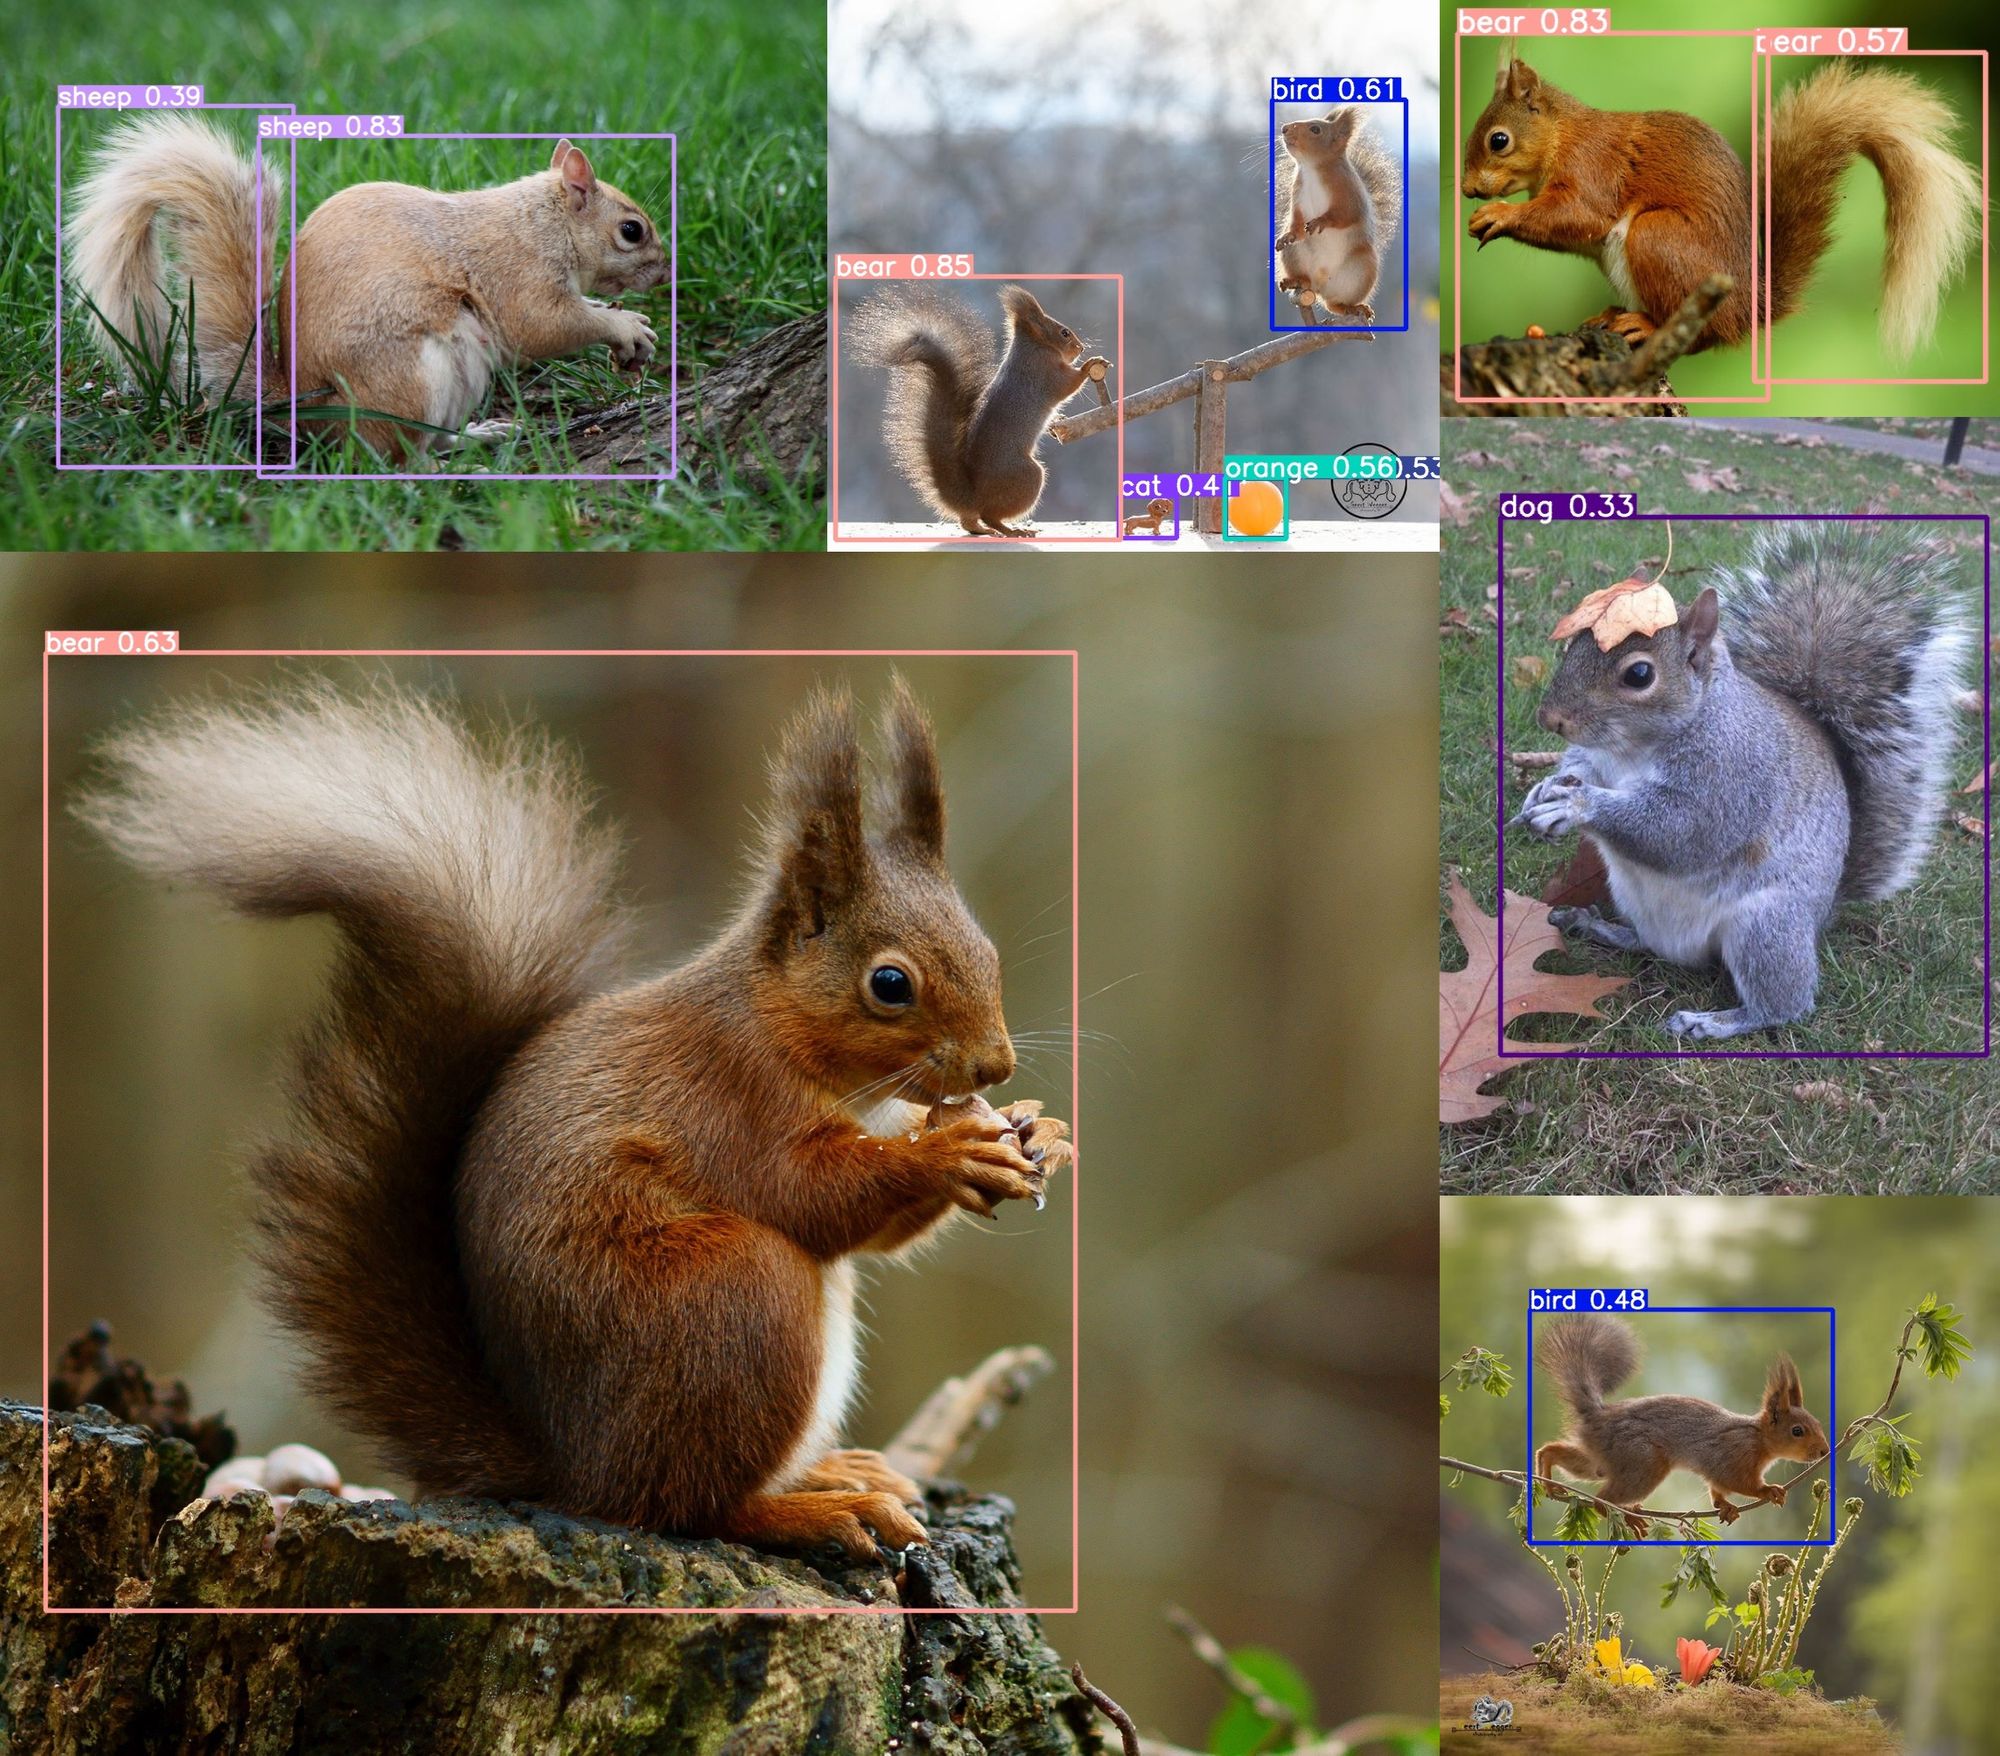 Six images of squirrels overlayed with bounding boxes and labels. The labels read either "sheep", "bear", "bird", or "dog", but never "squirrel"